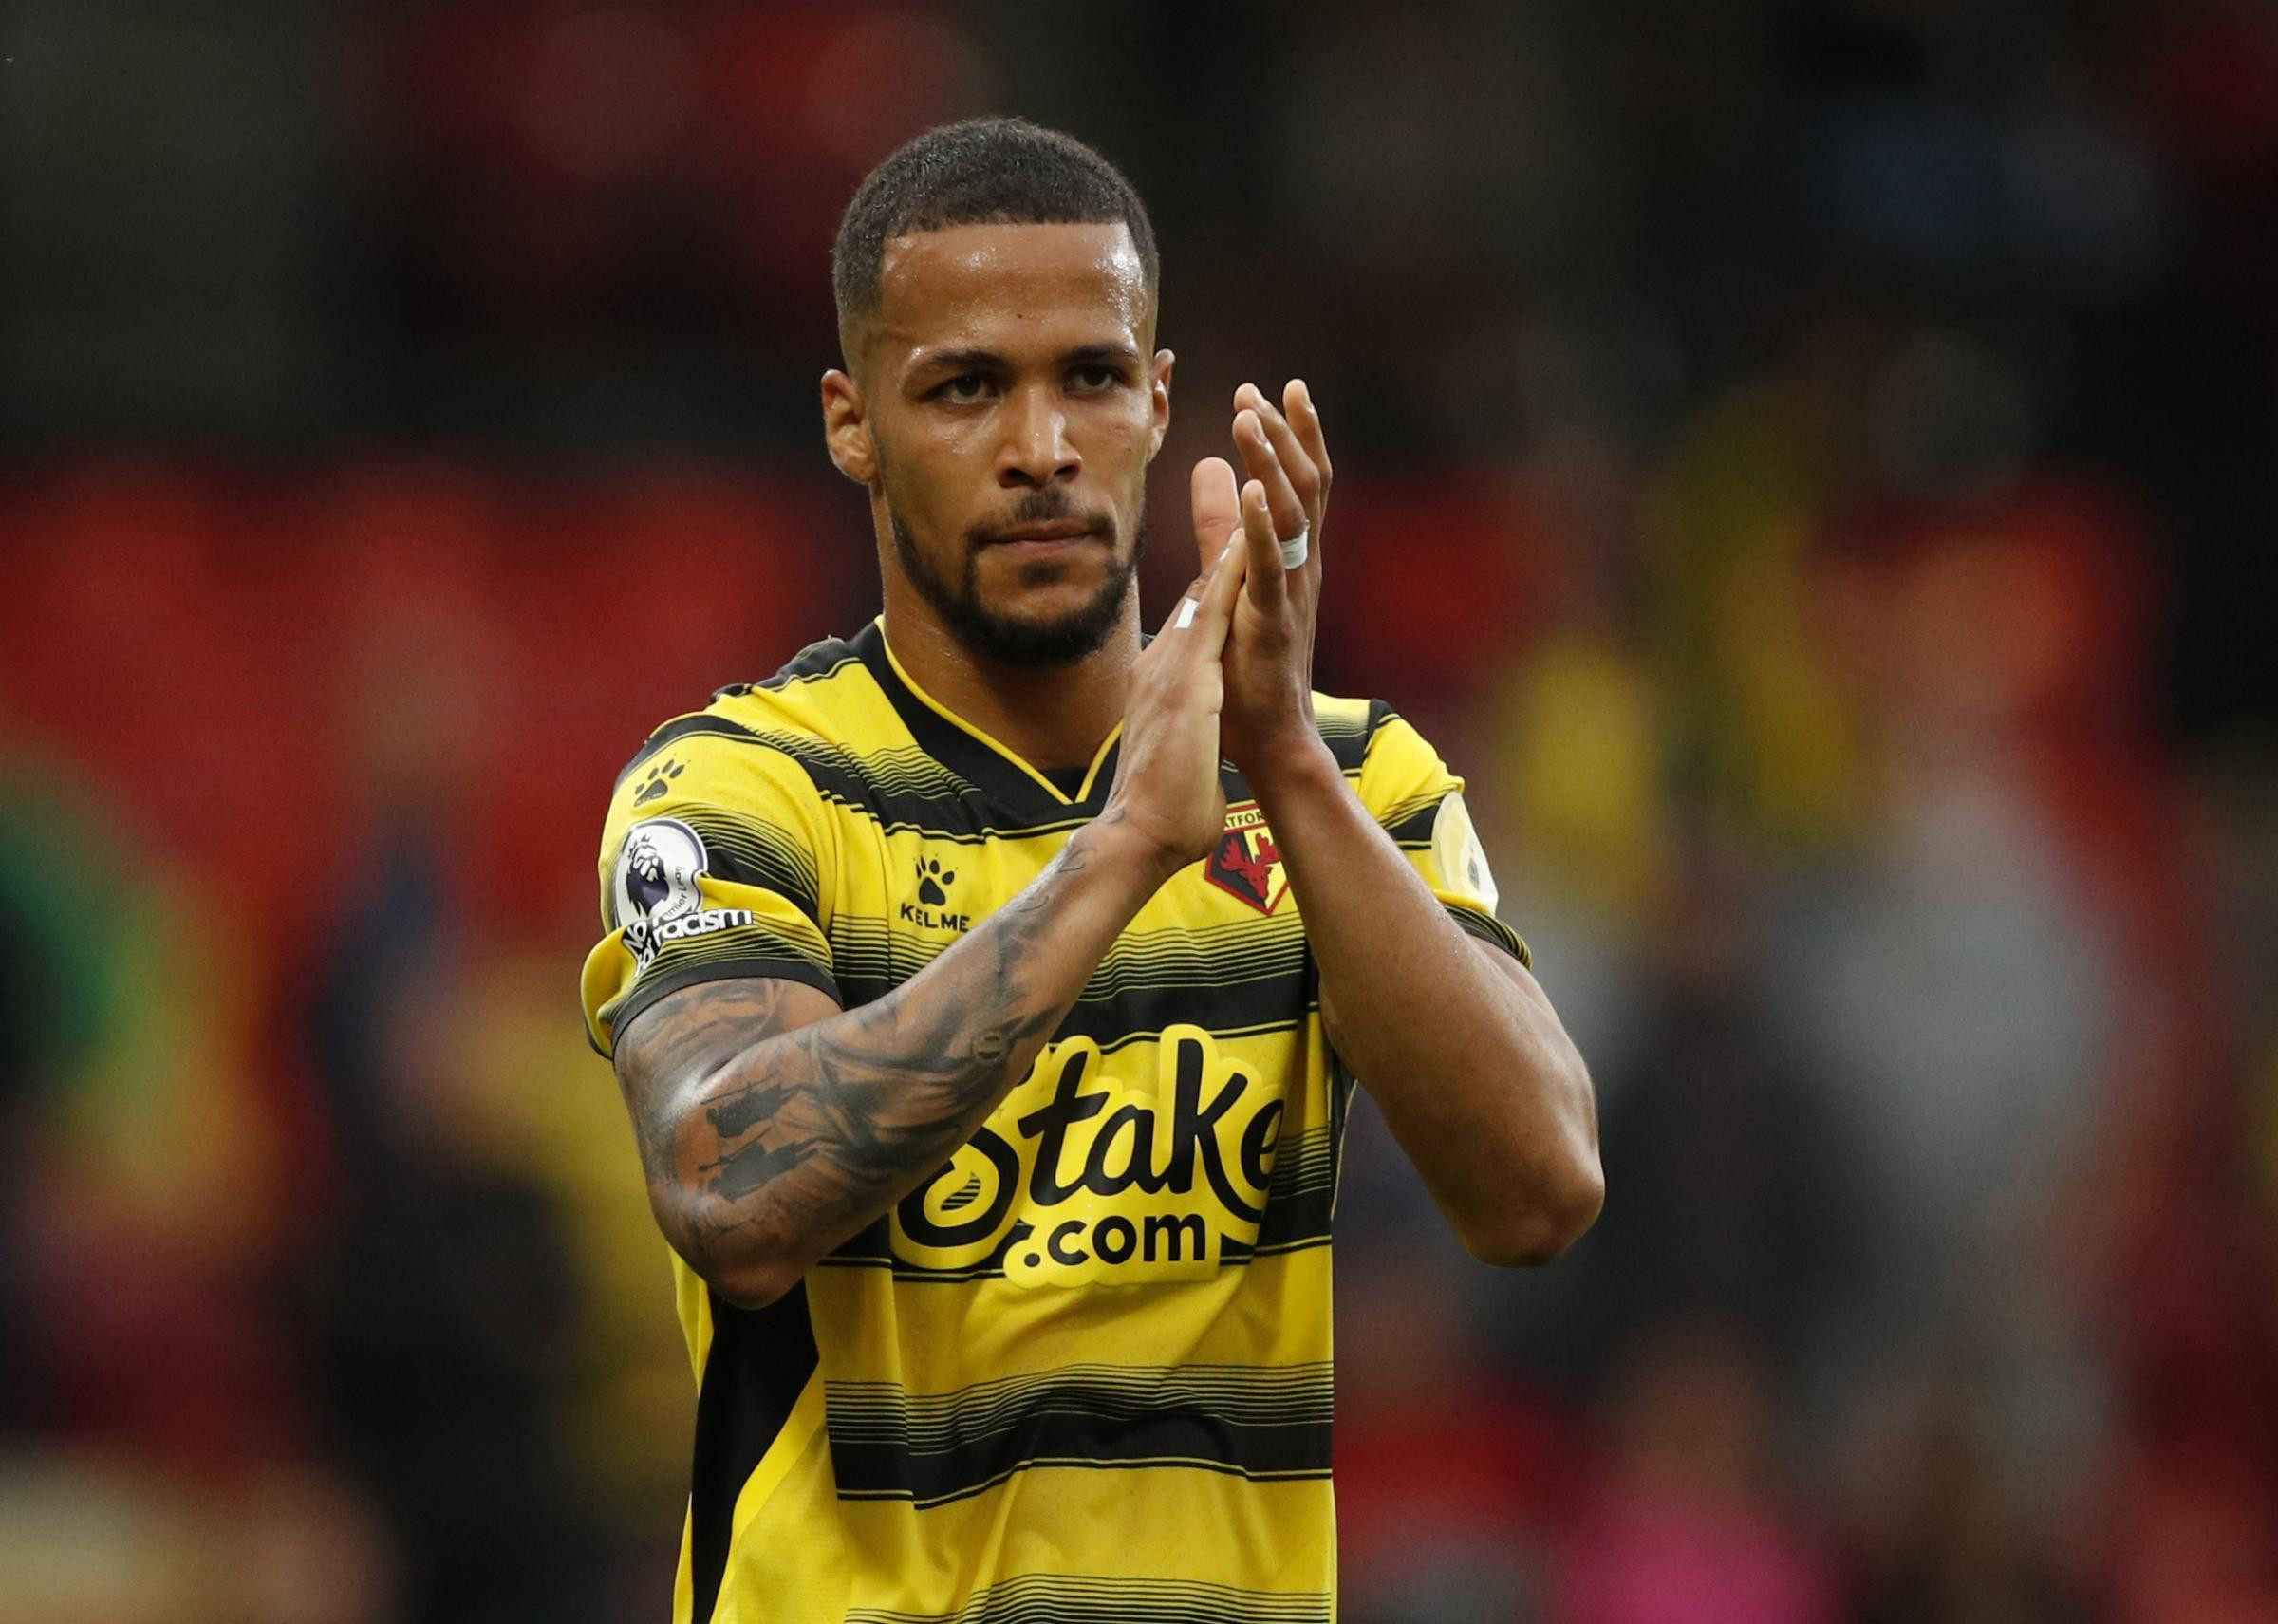 William Troost-Ekong confirms Watford exit as he prepares to join Serie A club Salernitana